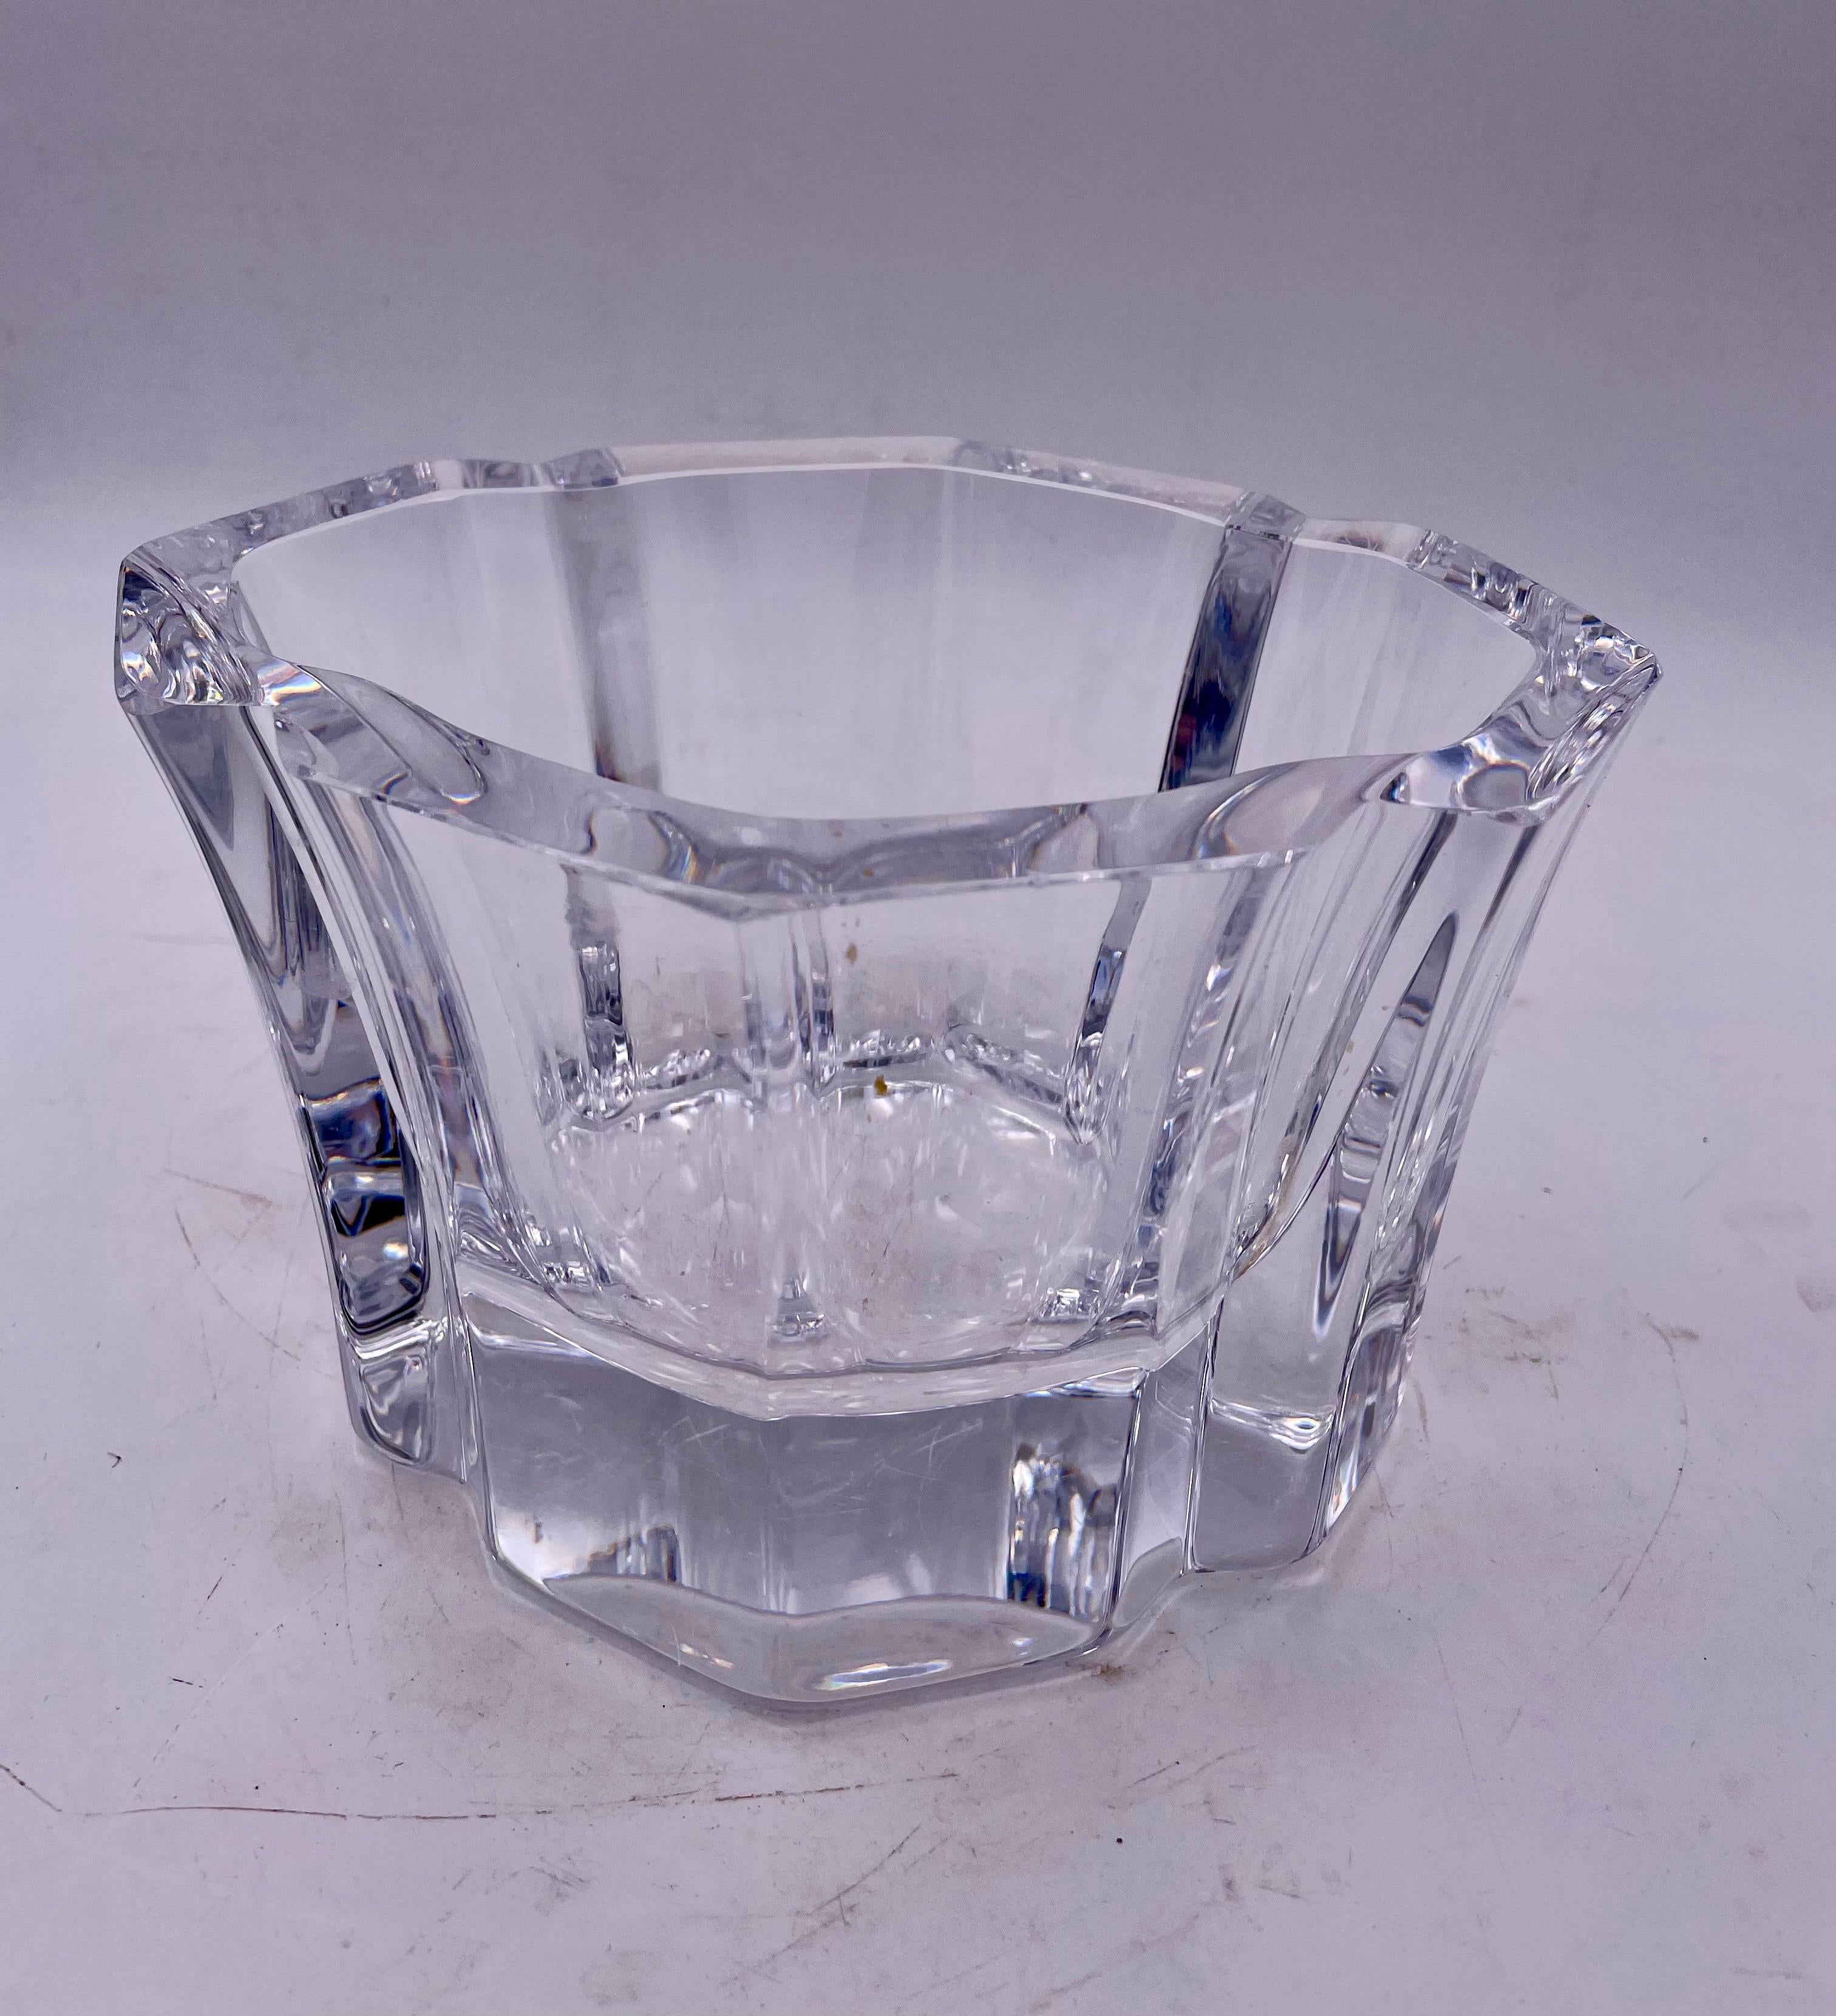 Hollywood Regency Orrefors Mid-Century Modern Vase in Thick Cut Crystal For Sale